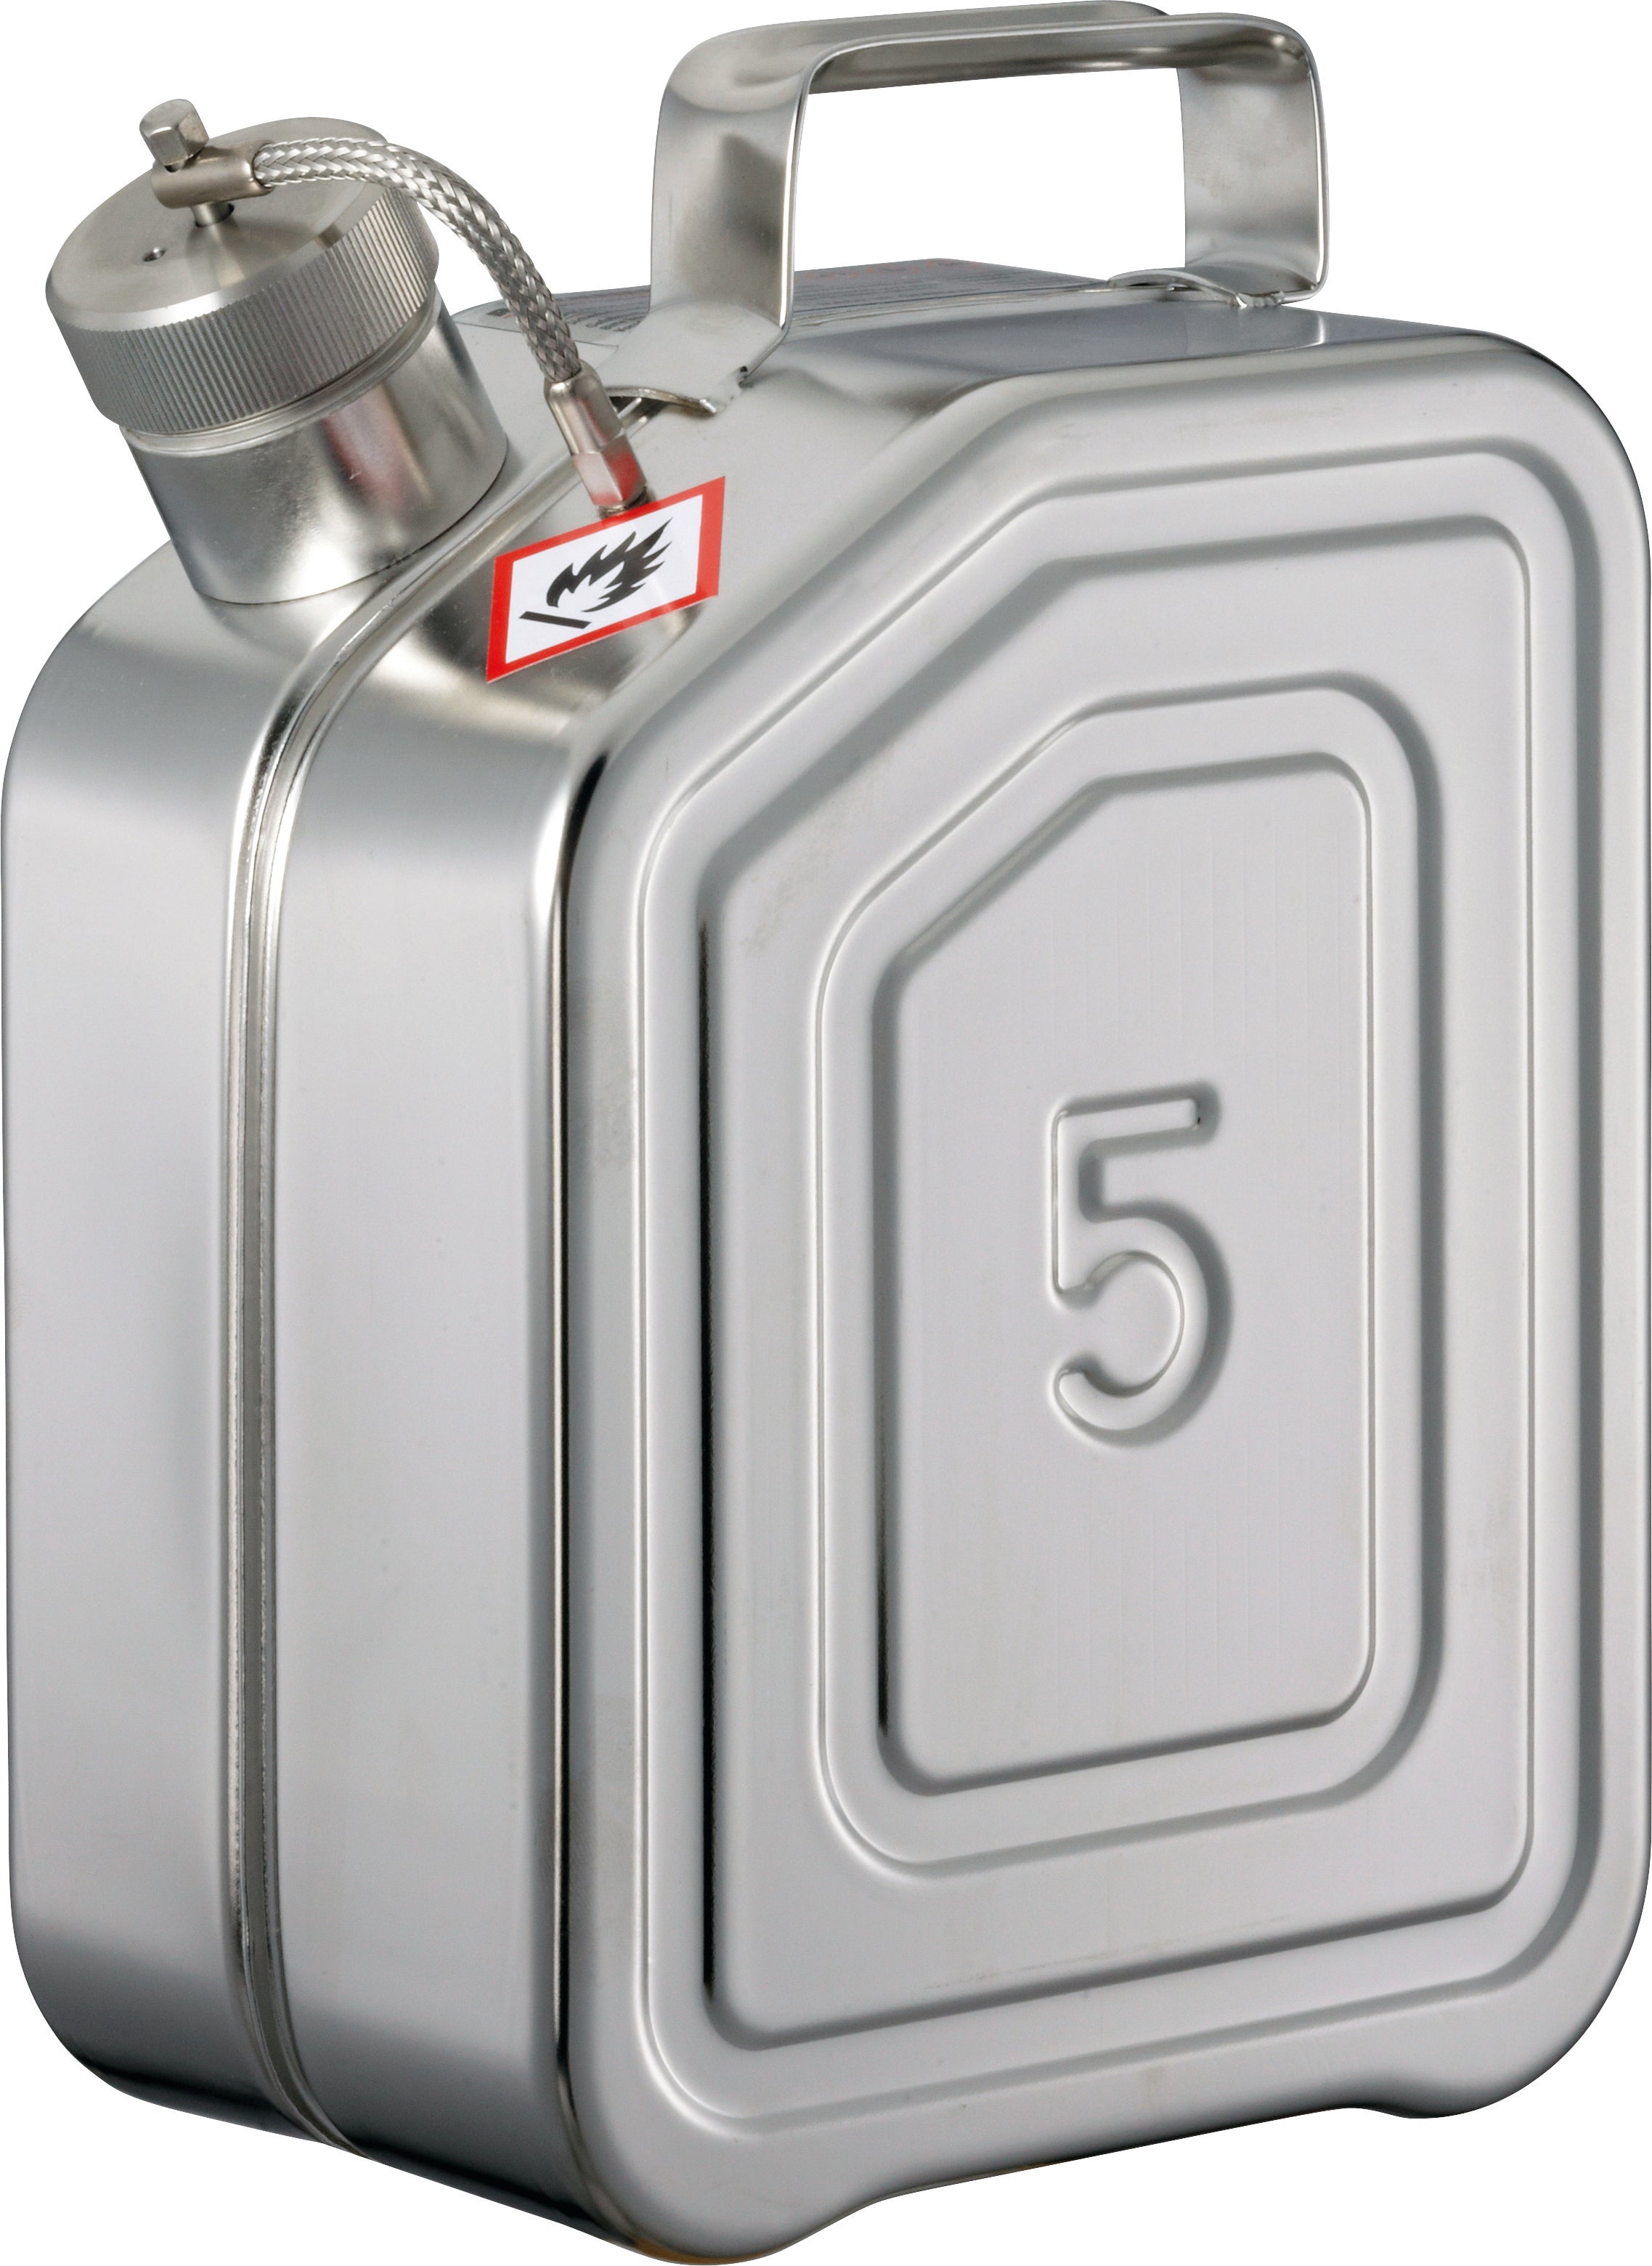 Transport canister st.steel 1.4301, 5 L, stainless steel 1.431 polished